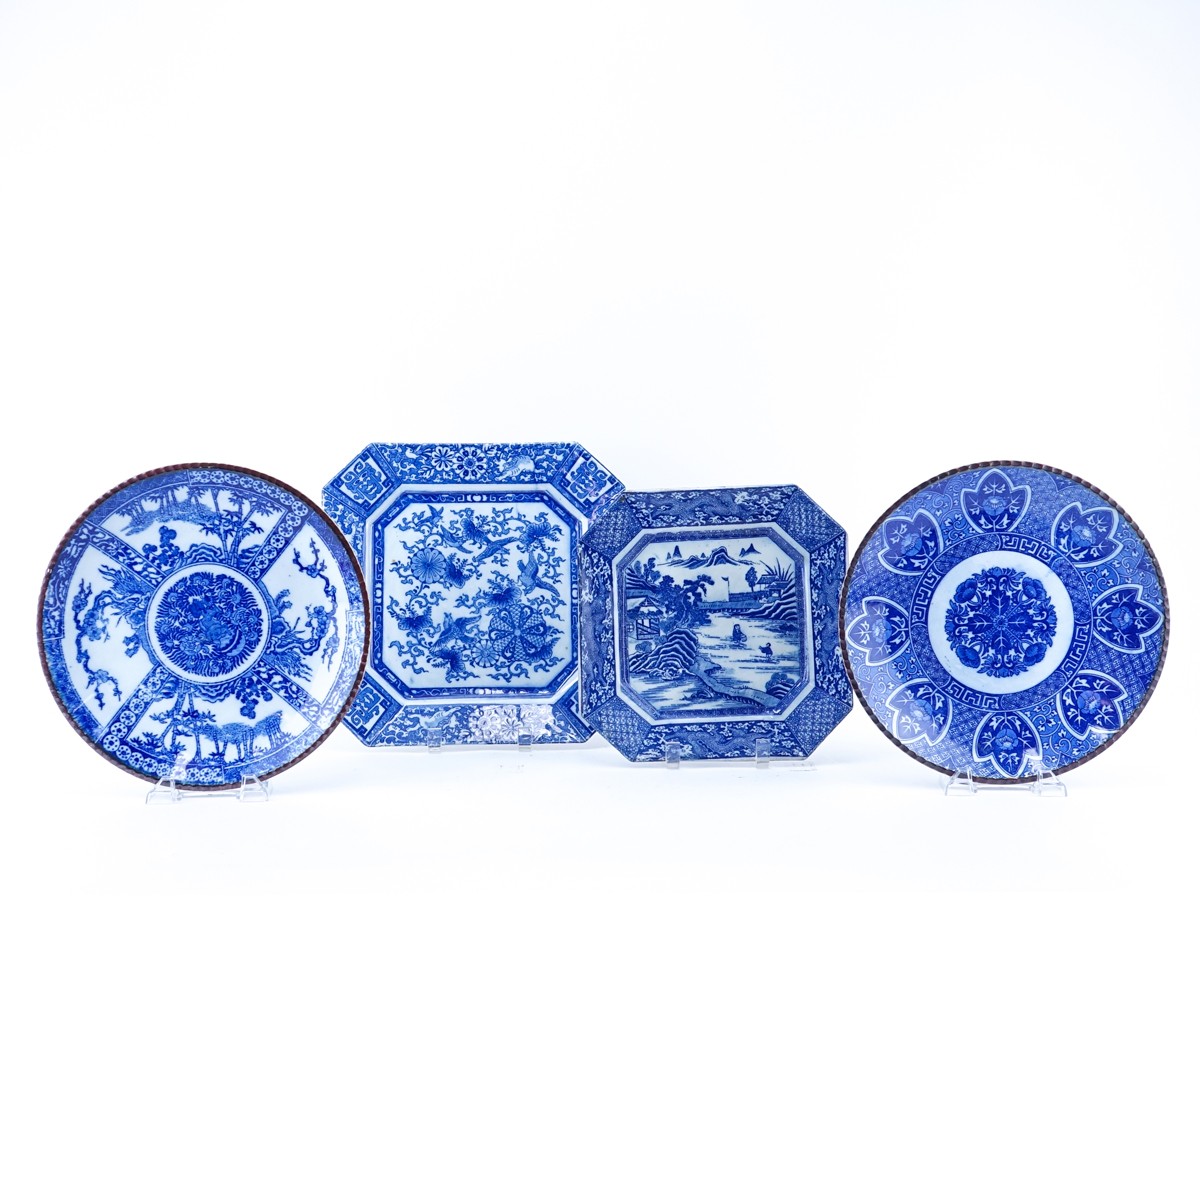 Four (4) Chinese Blue & White Pottery Chargers. Unsigned. Good condition. Largest measures 12" x 12